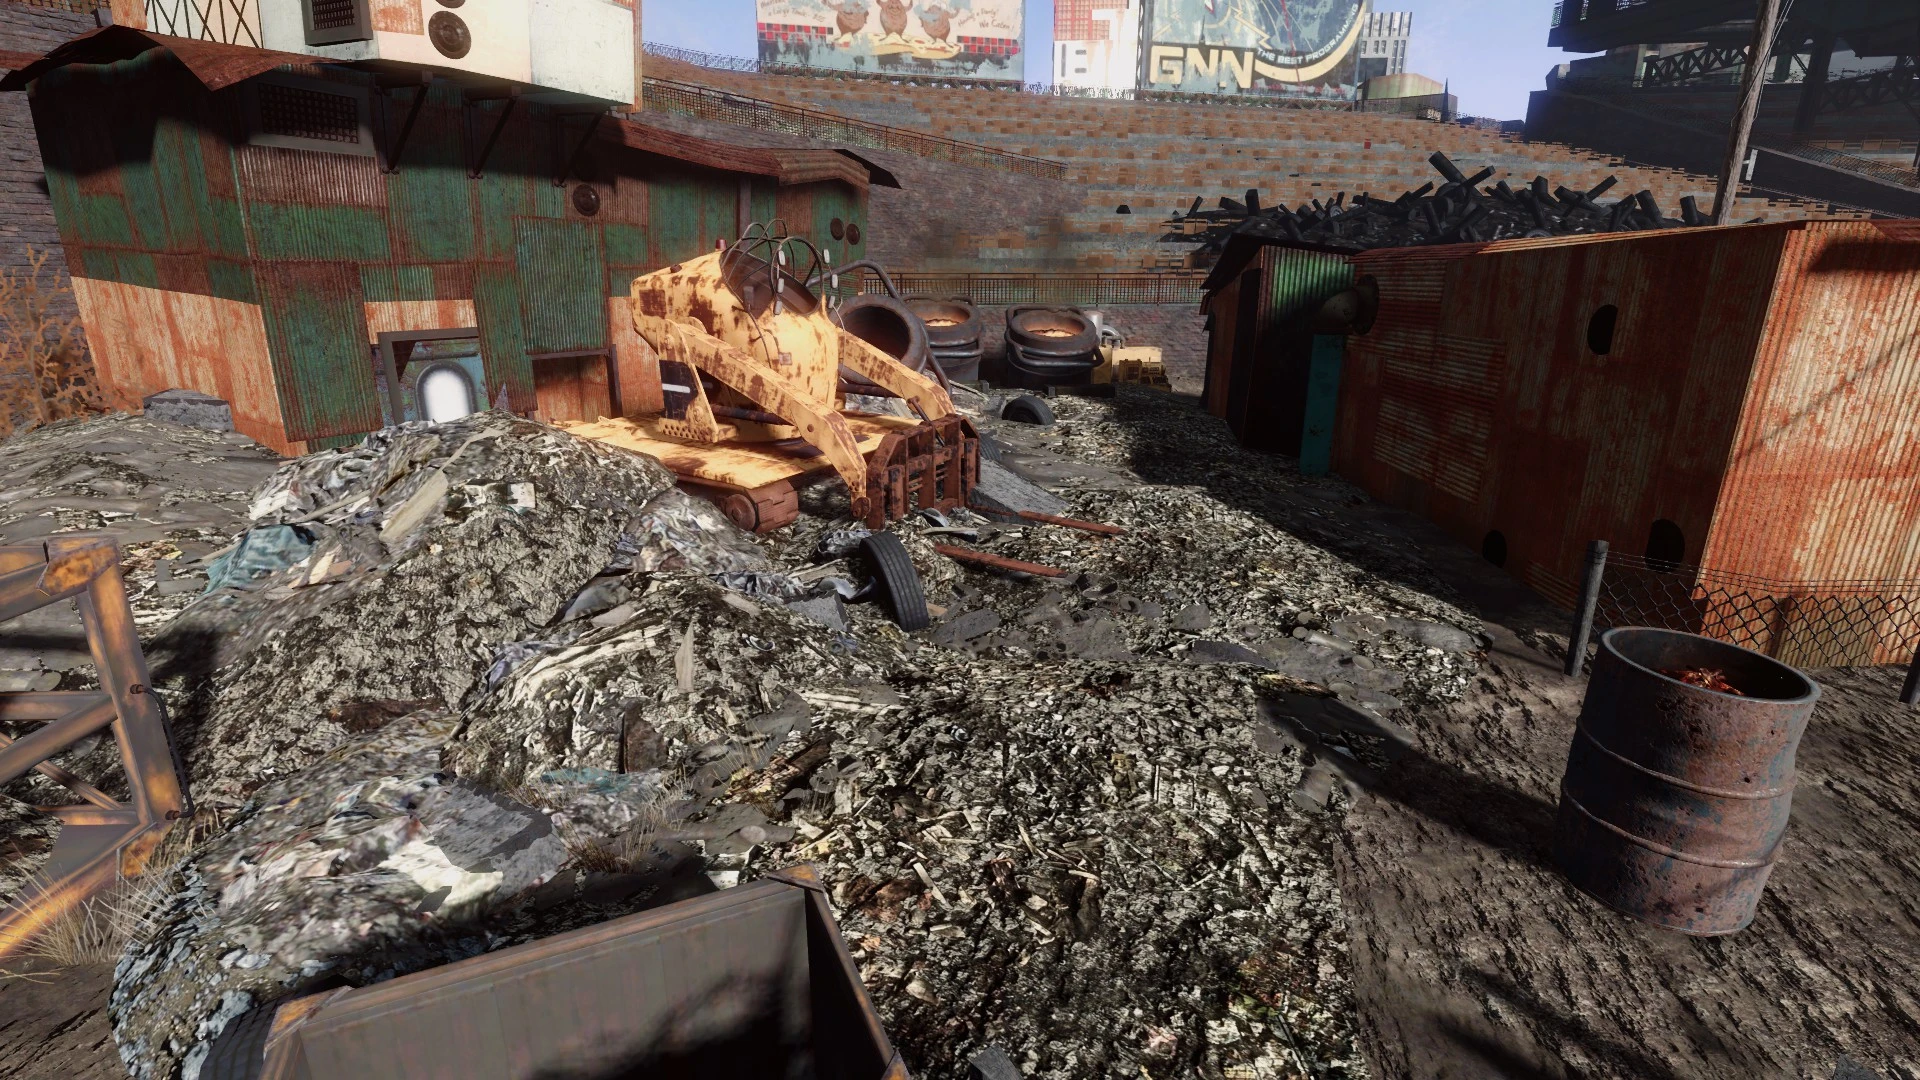 Fallout 4 more where that came from diamond фото 82